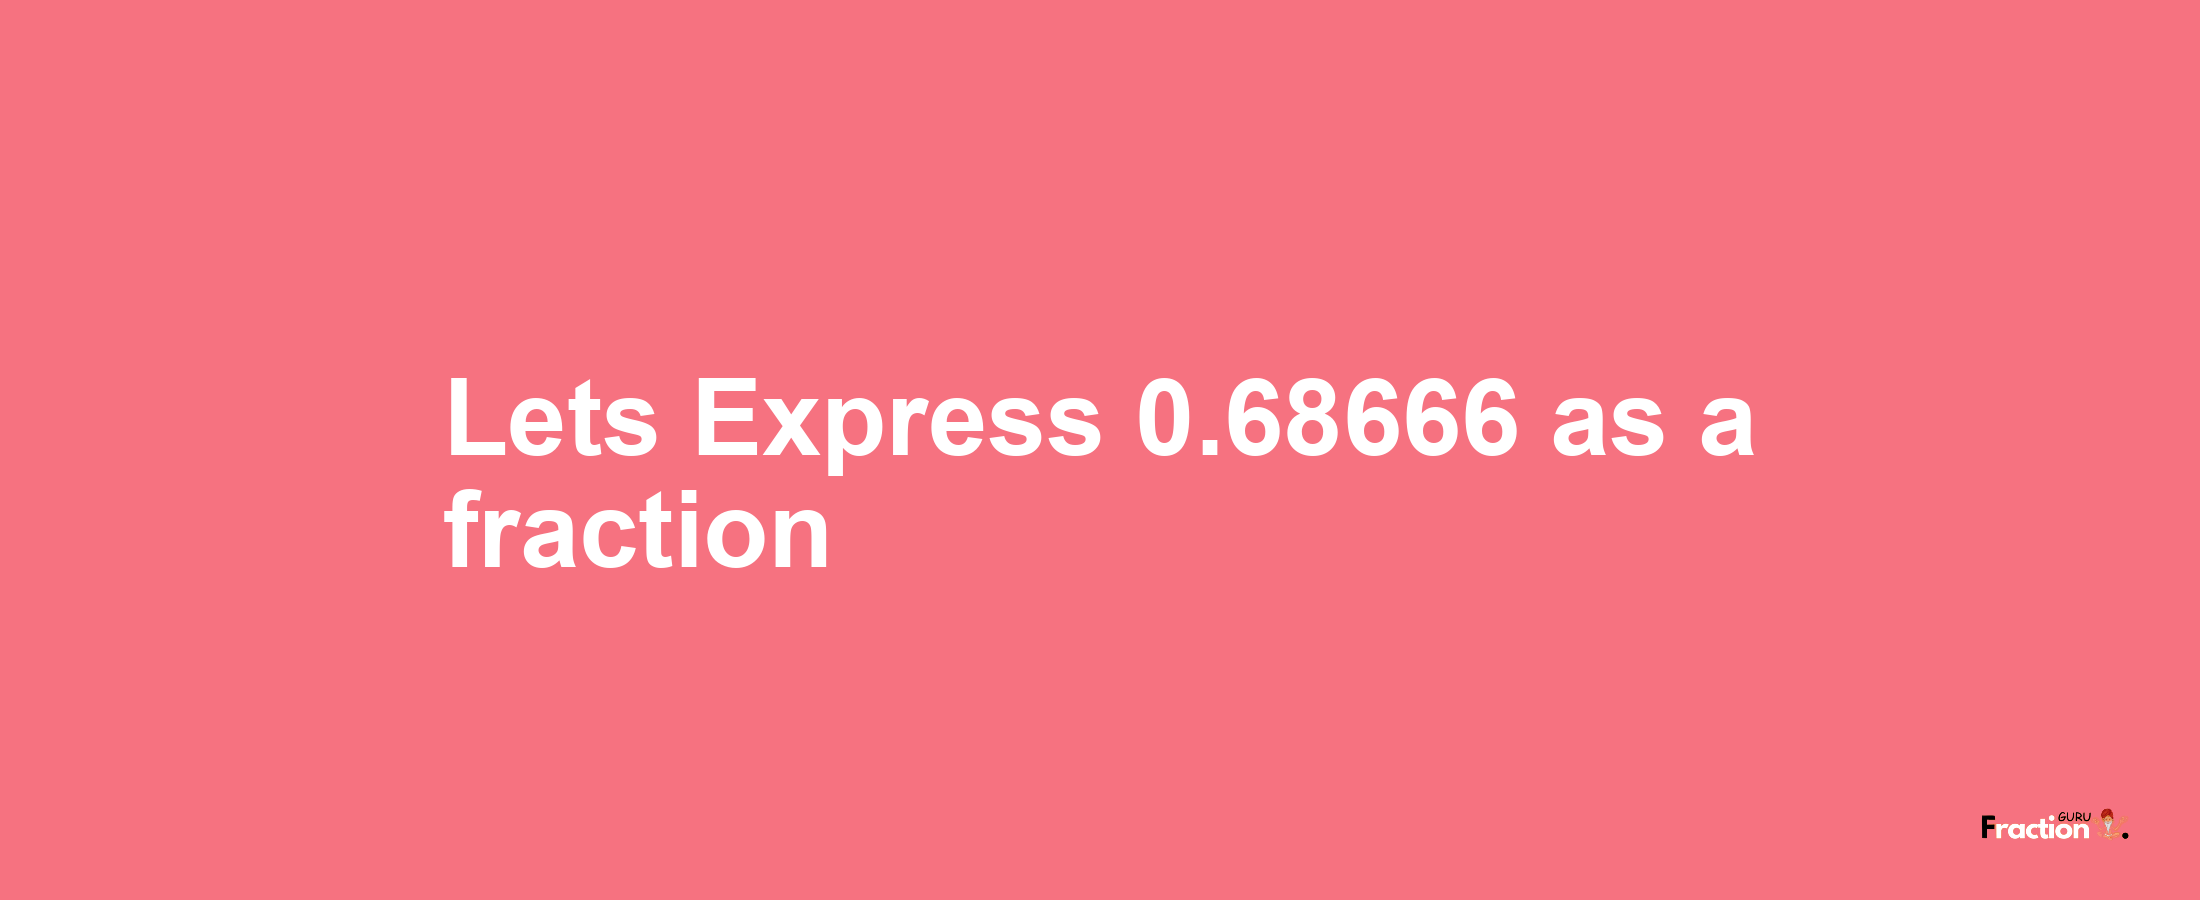 Lets Express 0.68666 as afraction